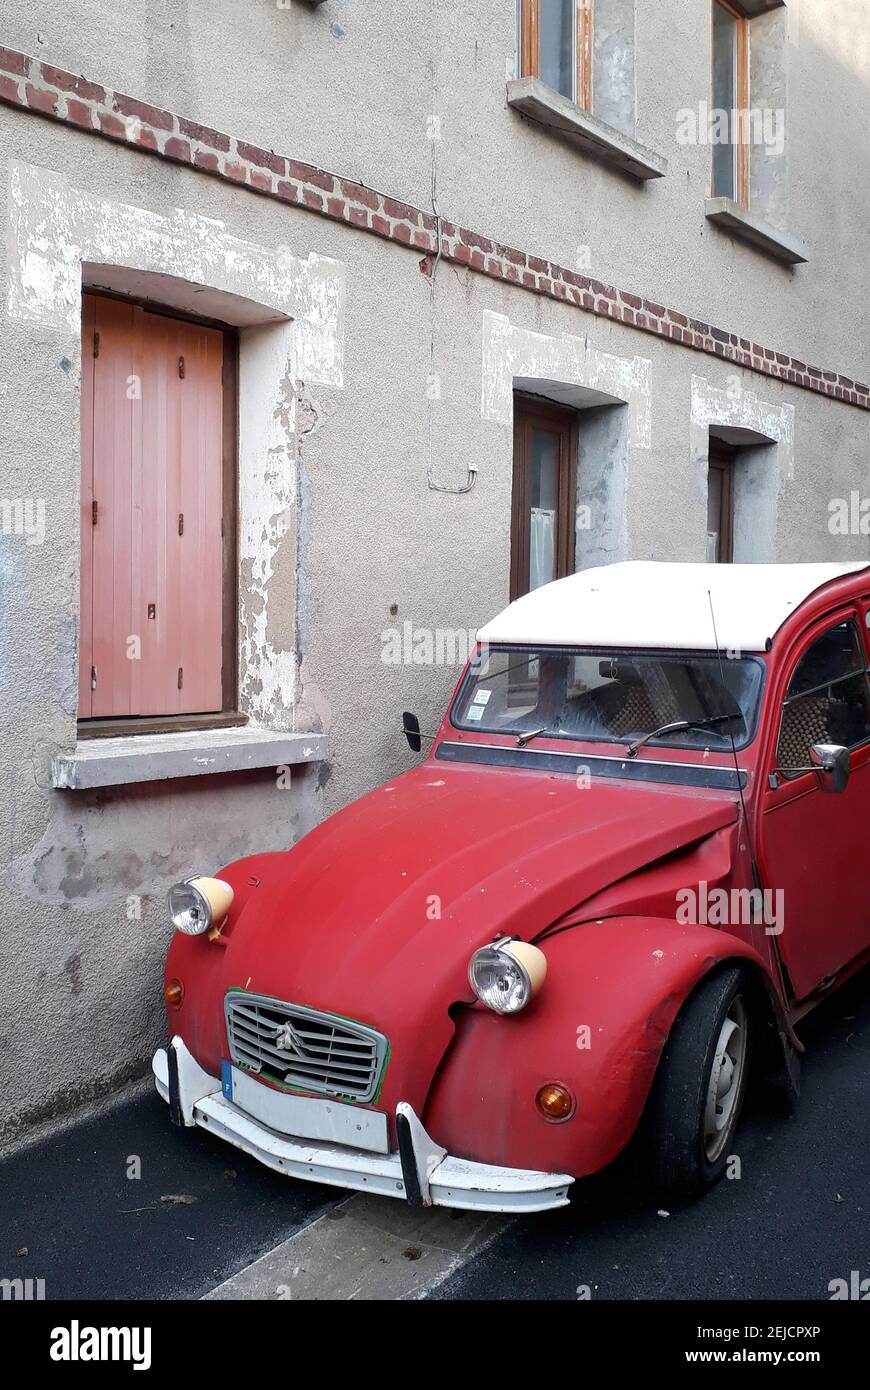 2cv, red classic car in front of a wall in Yport, Normandy, France Stock Photo